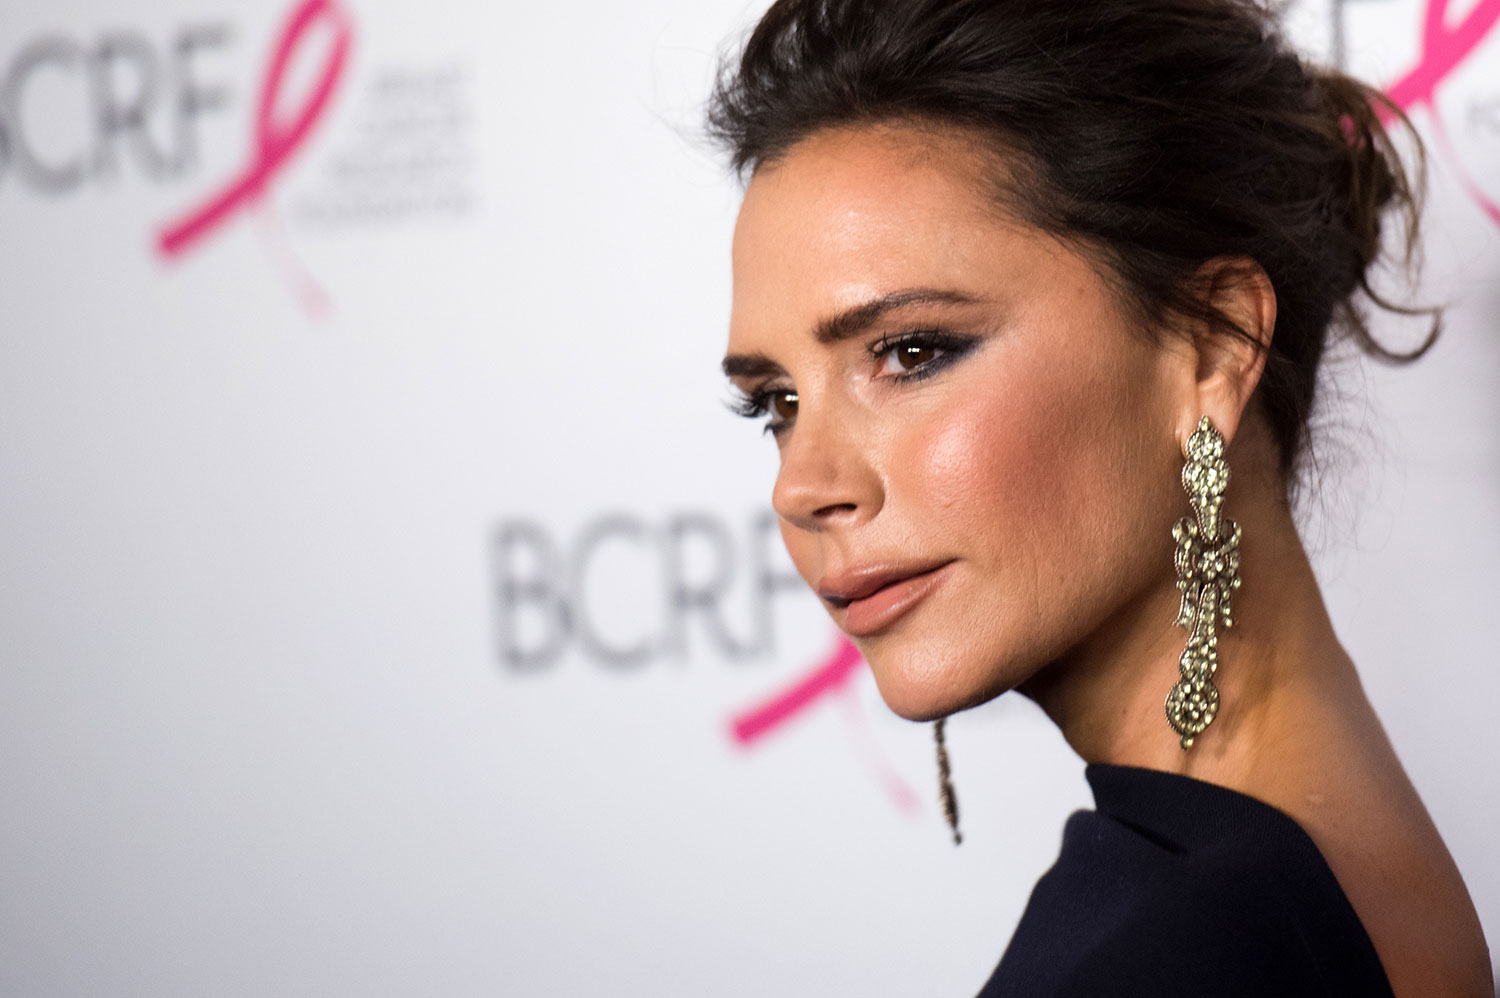 Victoria Beckham Just Gave Us The Best Beauty Tip